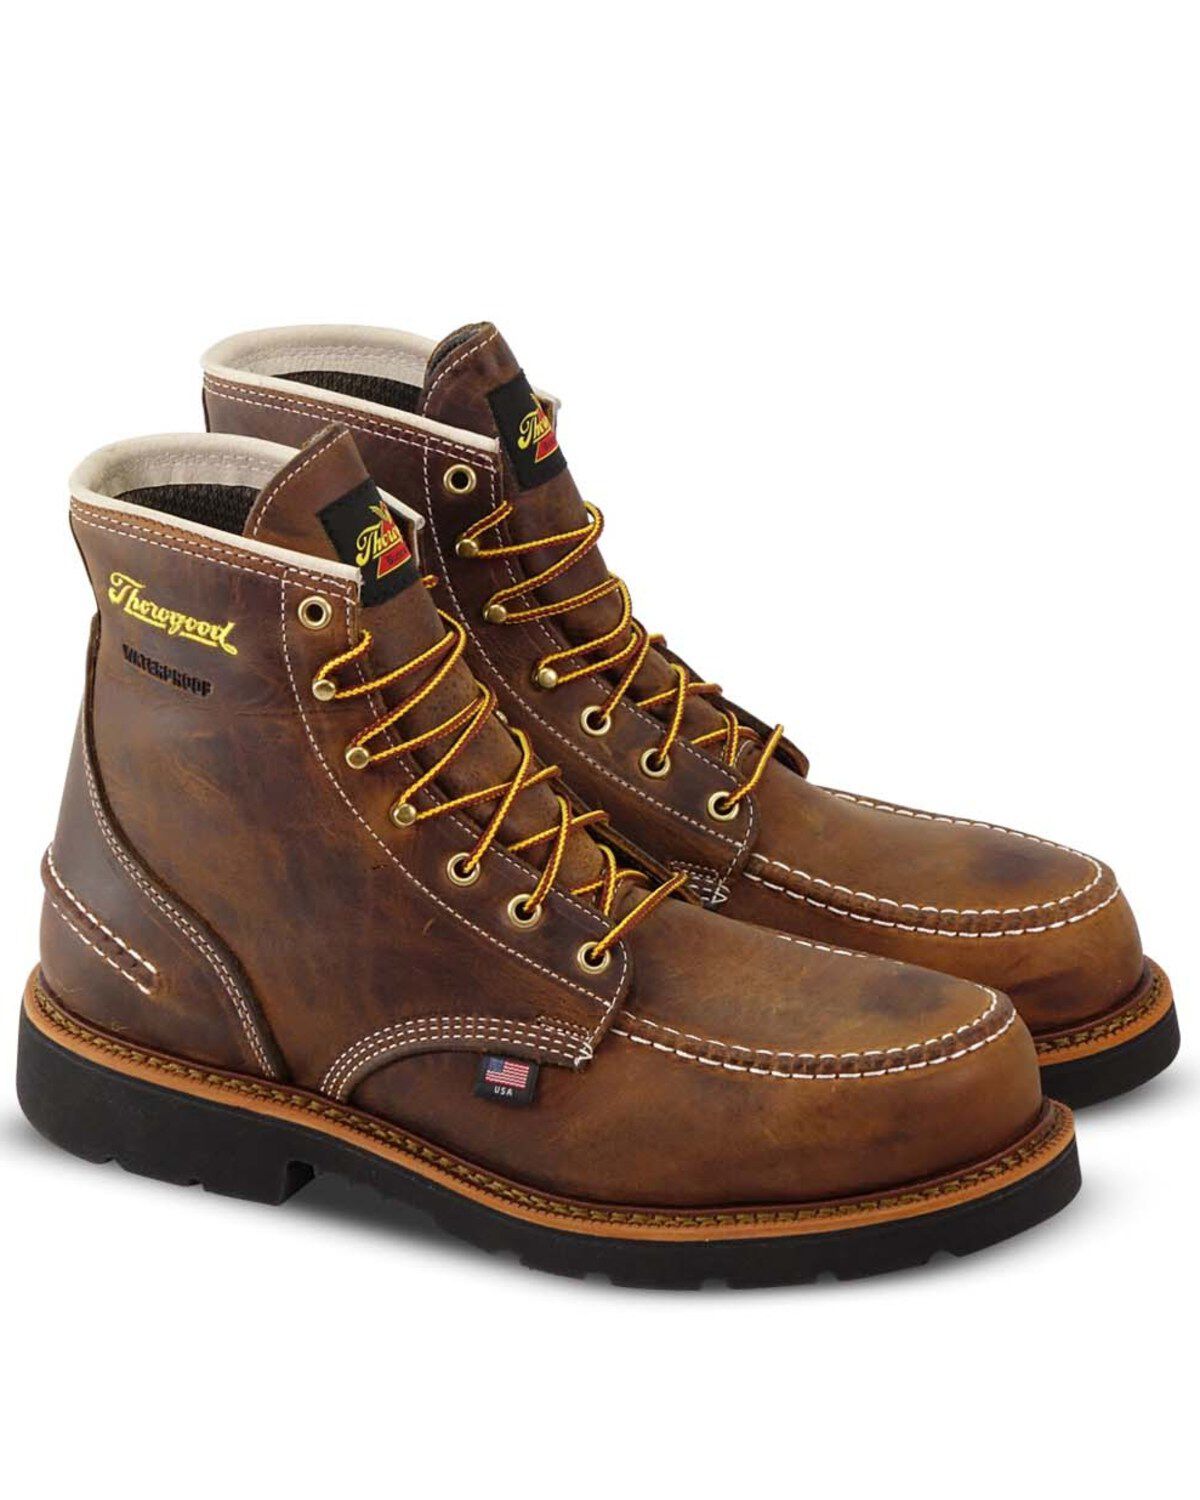 work boots without steel toe